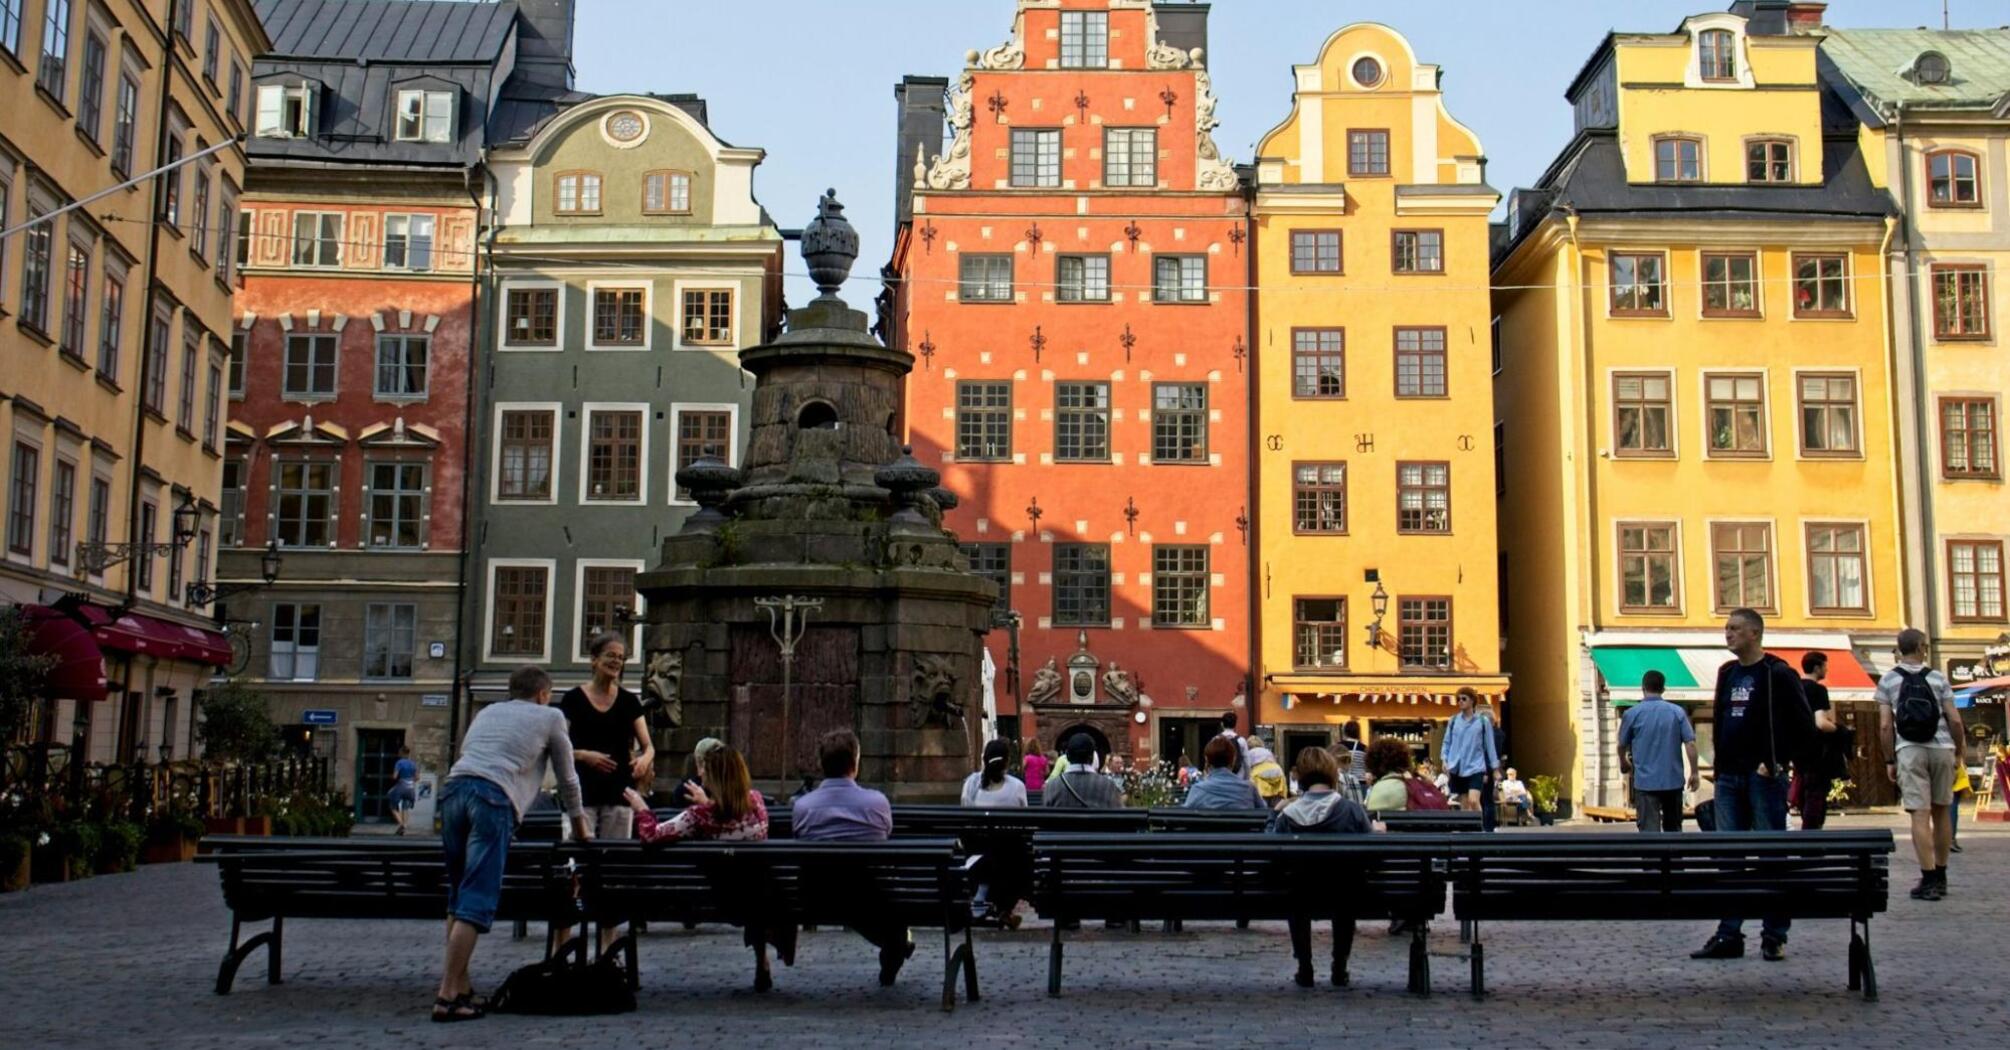 People sitting on the benches in front of building in Stockholm